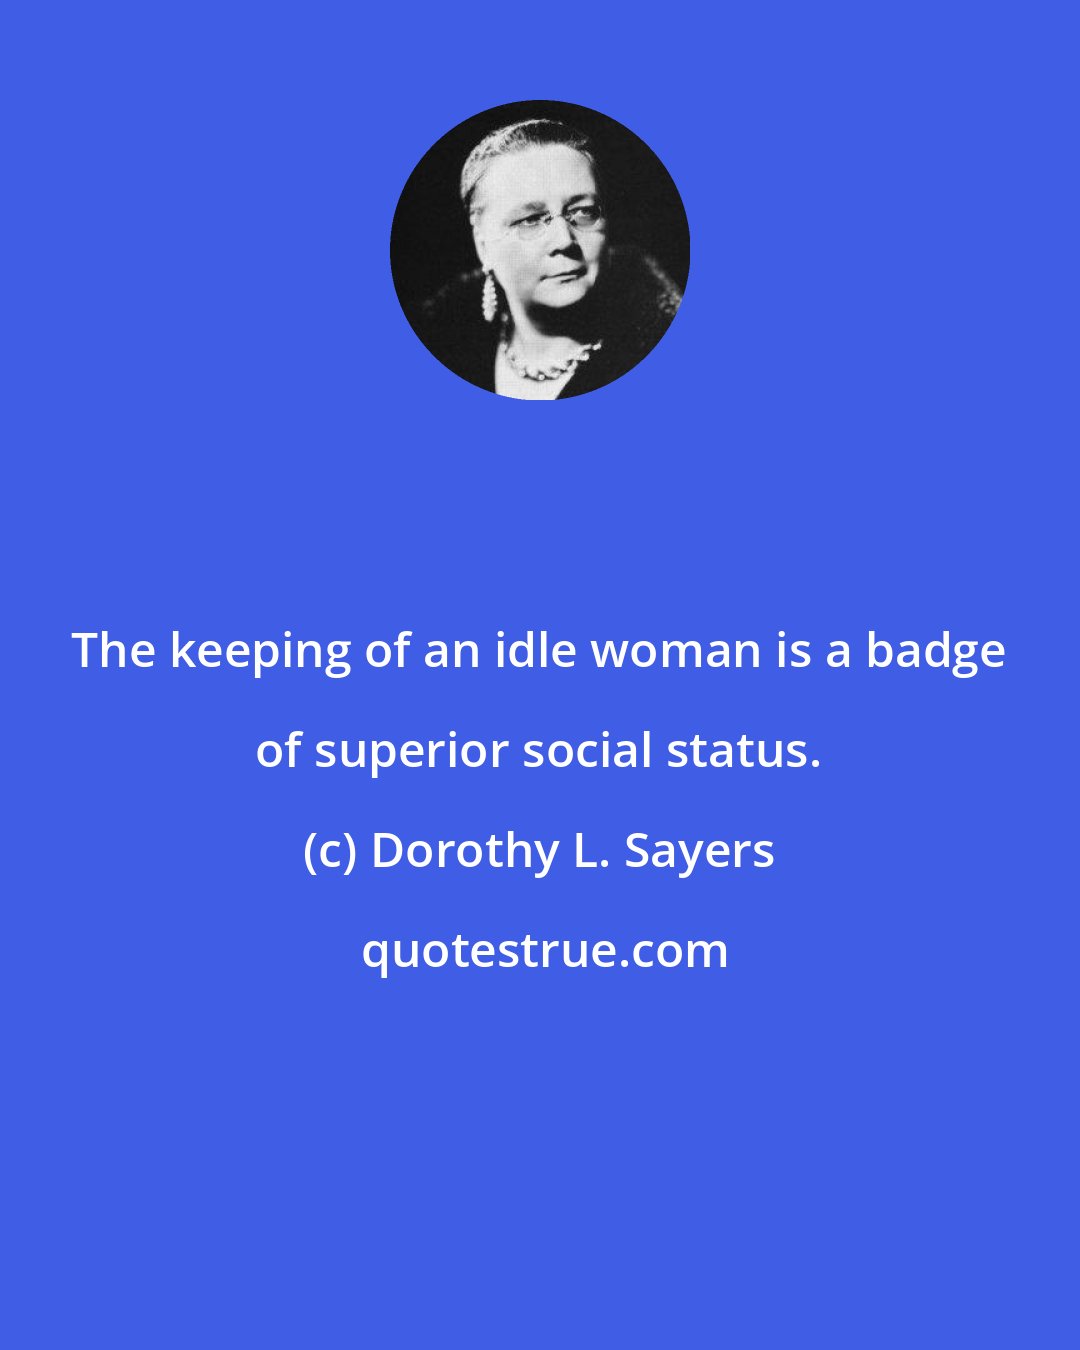 Dorothy L. Sayers: The keeping of an idle woman is a badge of superior social status.